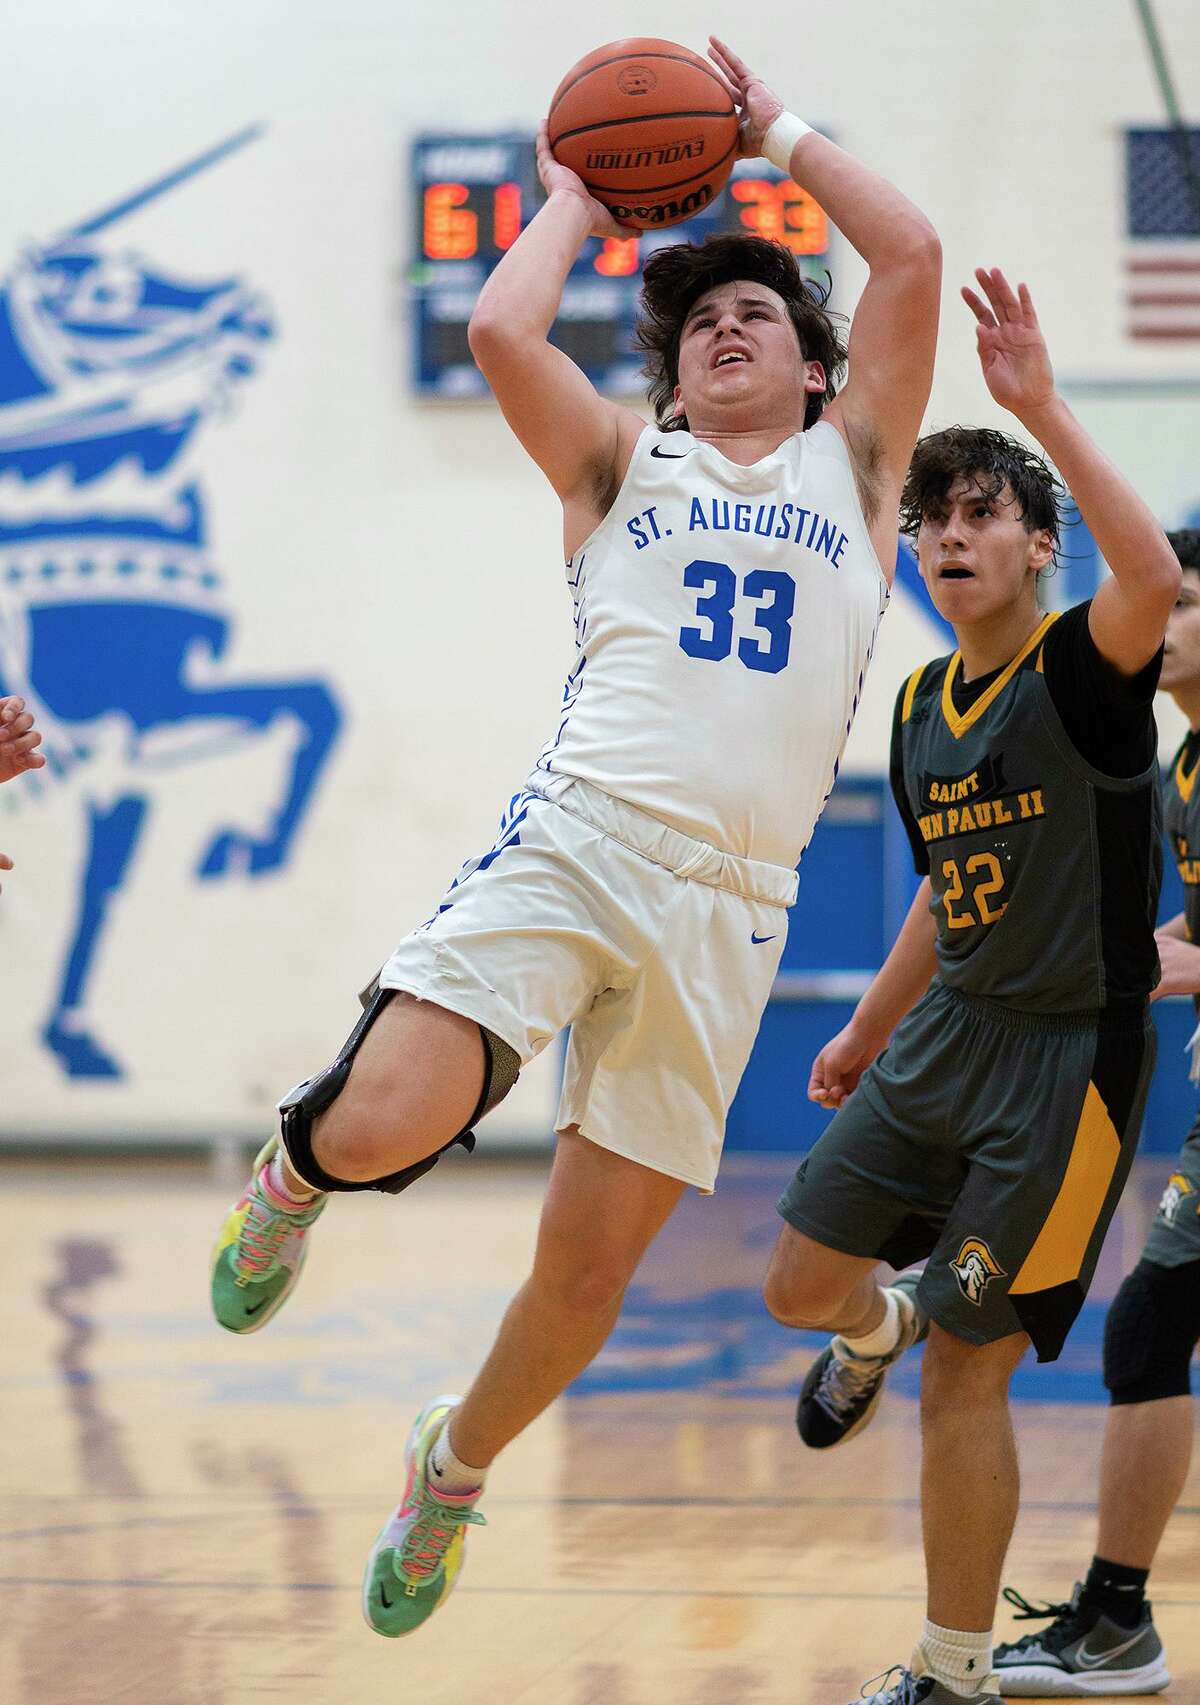 Estevan Barrientos and St. Augustine will face off with the Geneva School of Boerne in the first round of the TAPPS 5A basketball playoffs Saturday.